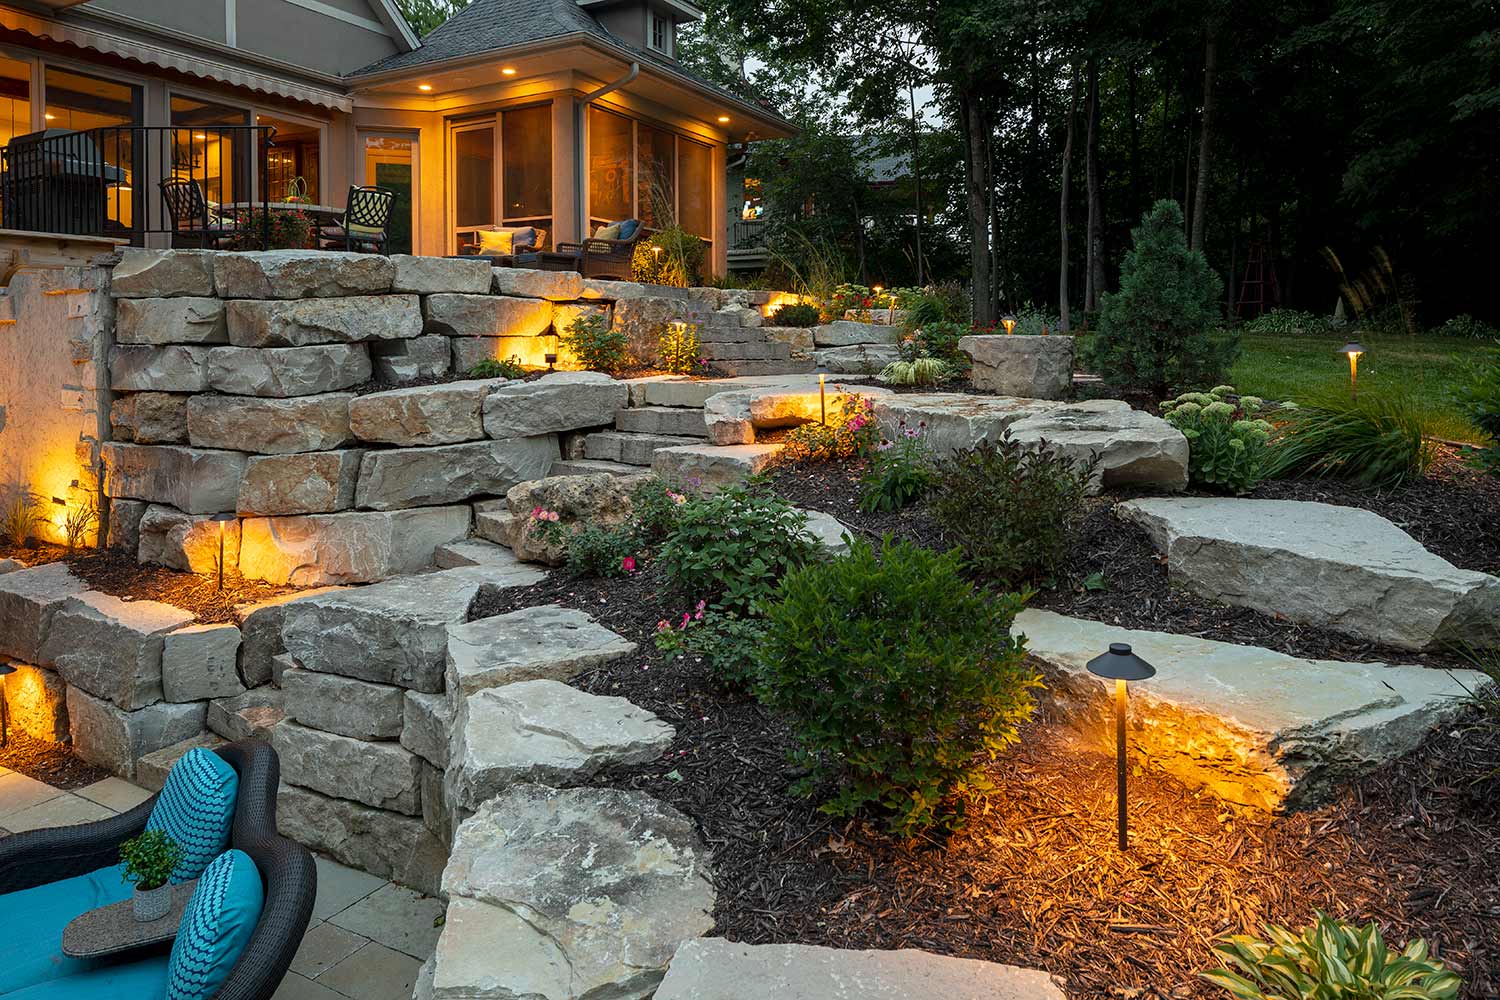 Landscape Lighting-Sugar Land TX Landscape Designs & Outdoor Living Areas-We offer Landscape Design, Outdoor Patios & Pergolas, Outdoor Living Spaces, Stonescapes, Residential & Commercial Landscaping, Irrigation Installation & Repairs, Drainage Systems, Landscape Lighting, Outdoor Living Spaces, Tree Service, Lawn Service, and more.